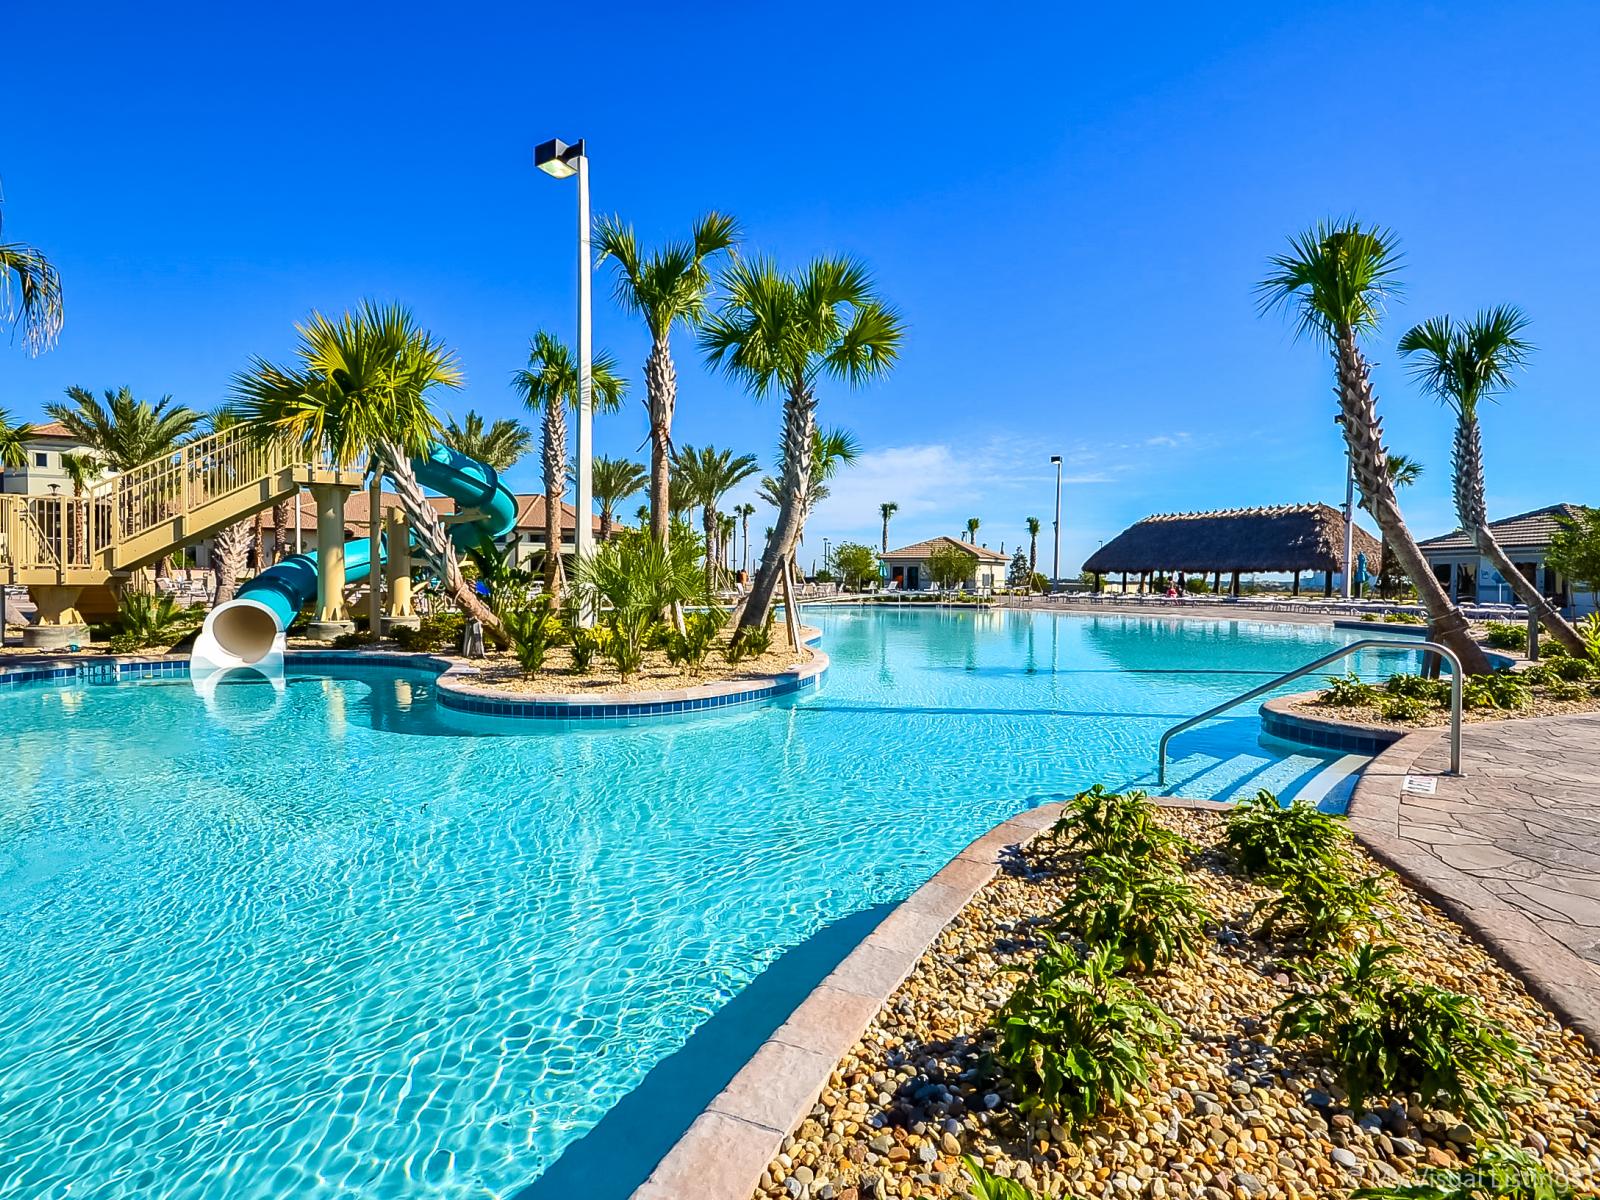 Resort amenity - Lazy river and Water slides